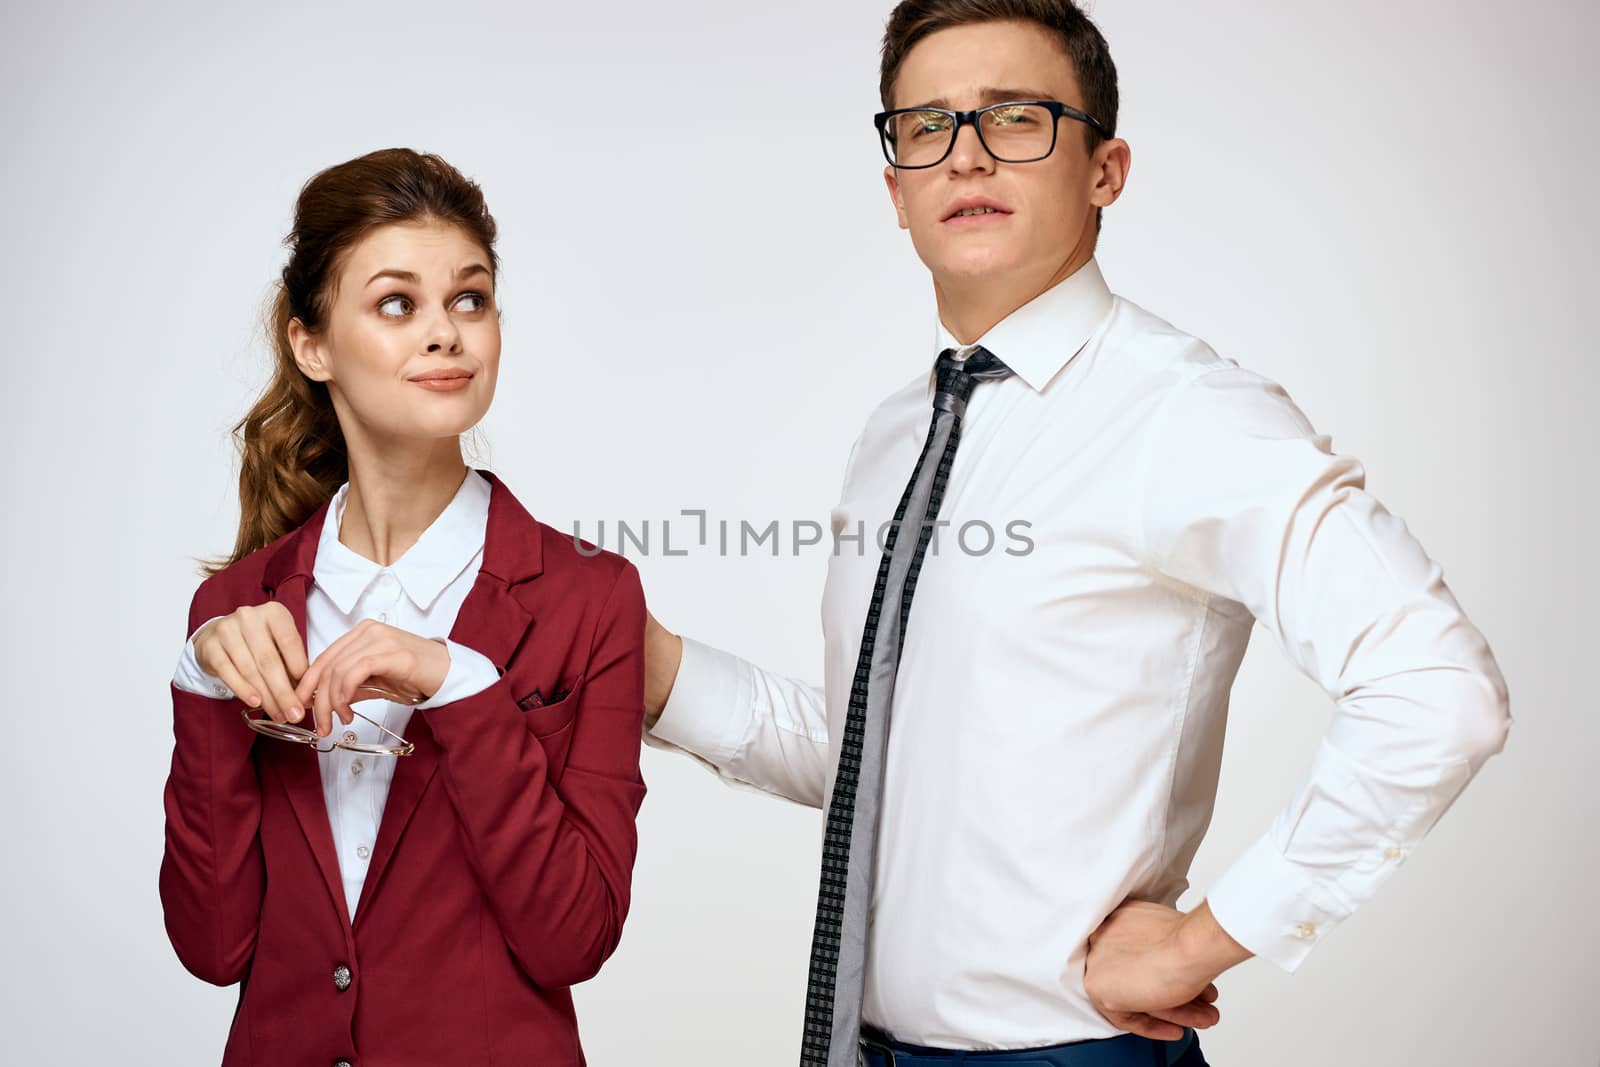 Work colleagues Business couple office officials team studio light background. High quality photo